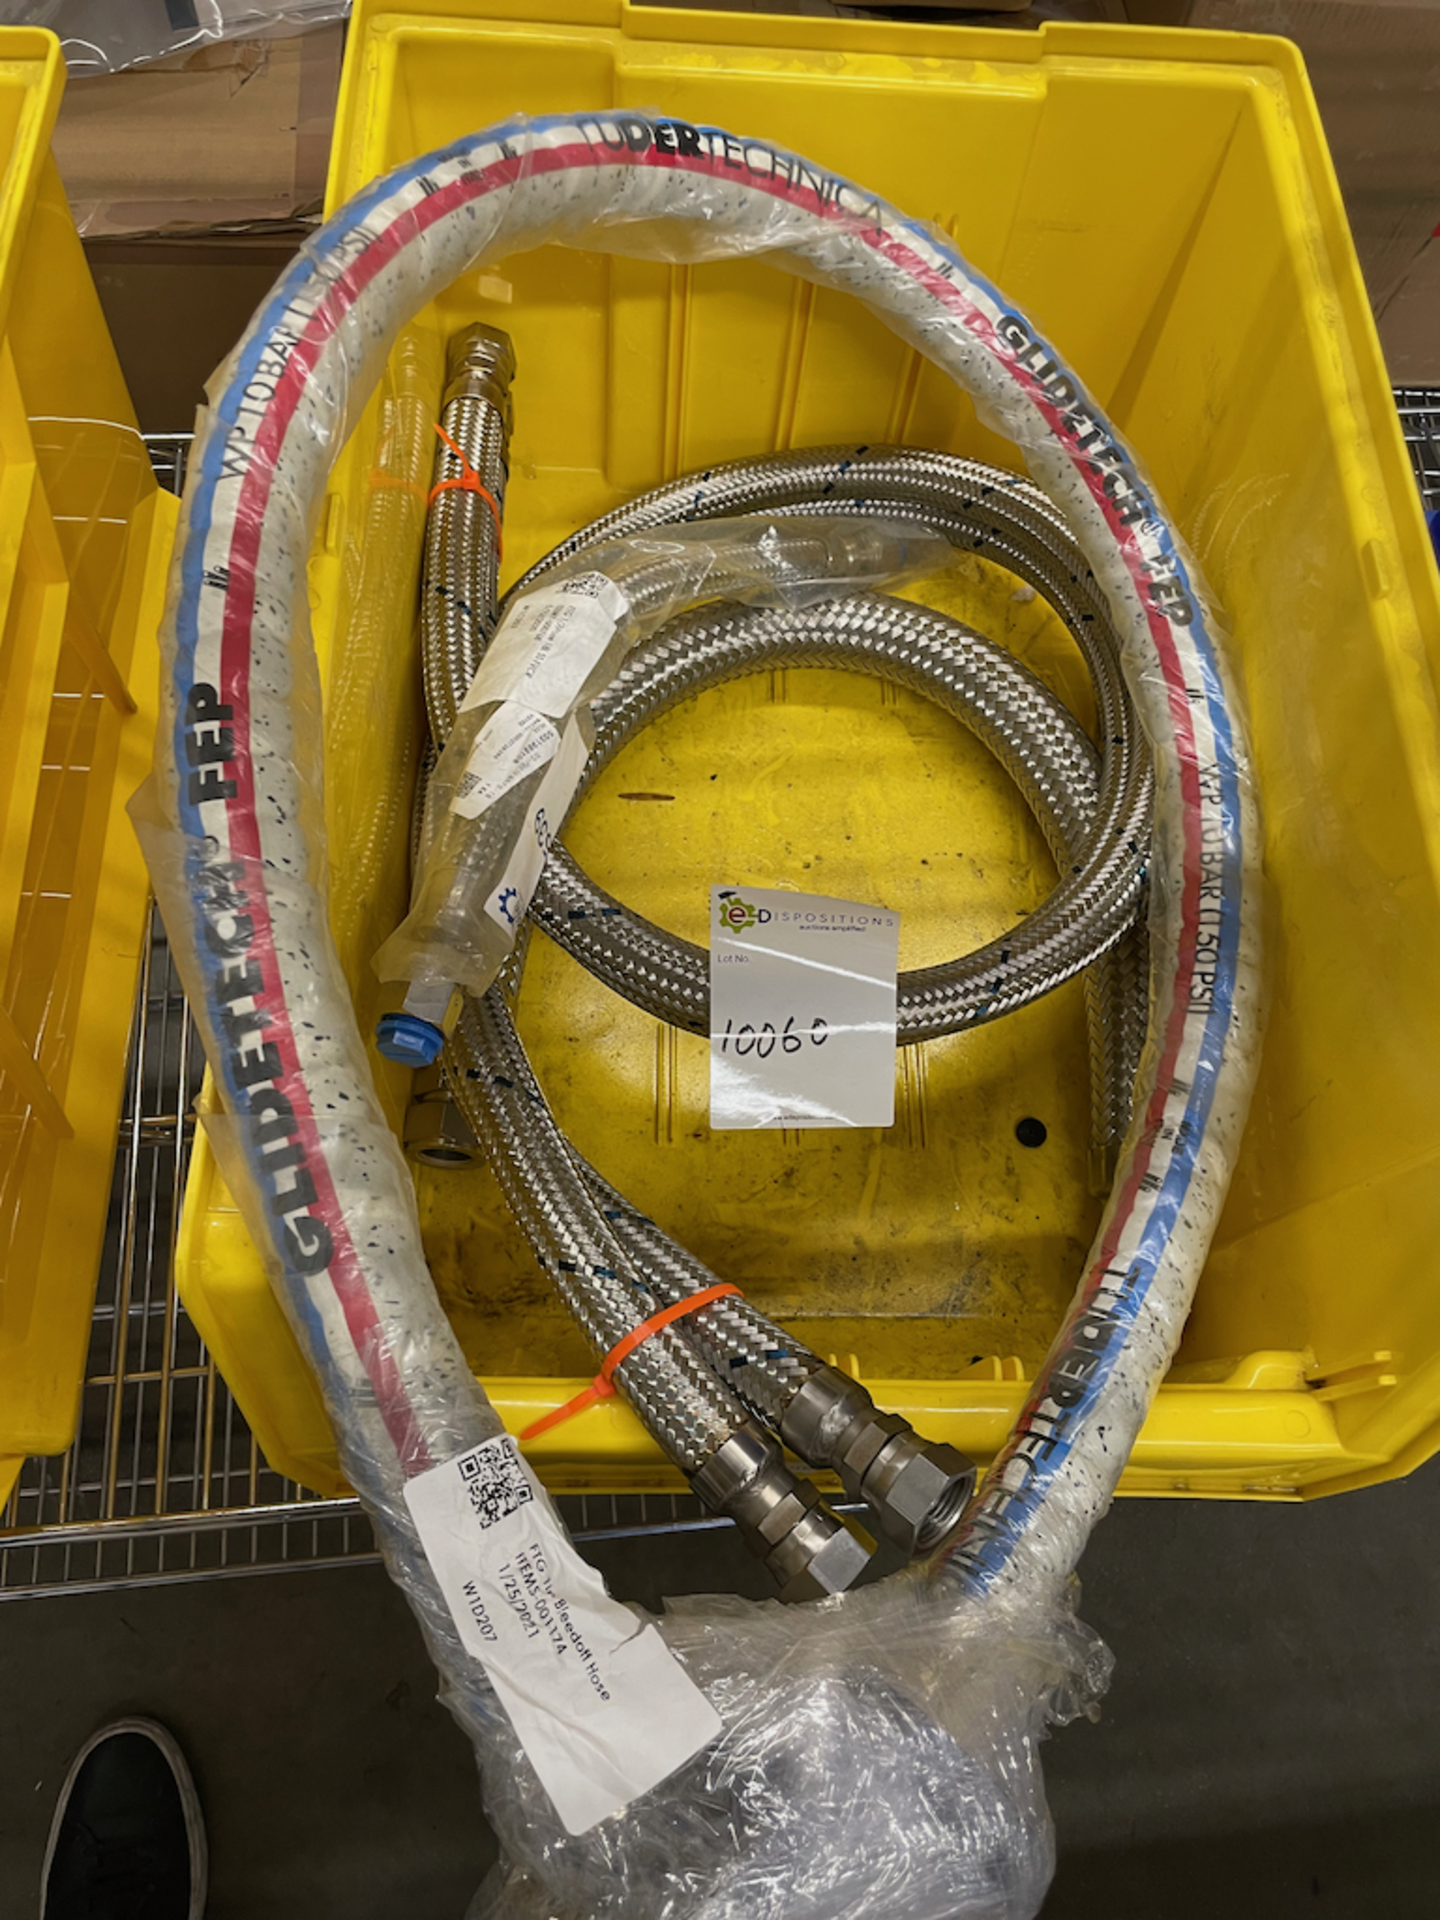 LOT CONSISTING OF QTY-4 SECTIONS OF BRAIDED WIRE TUBES | CABLES, 2 ~5' SECTIONS & 1- 2' SECTION -